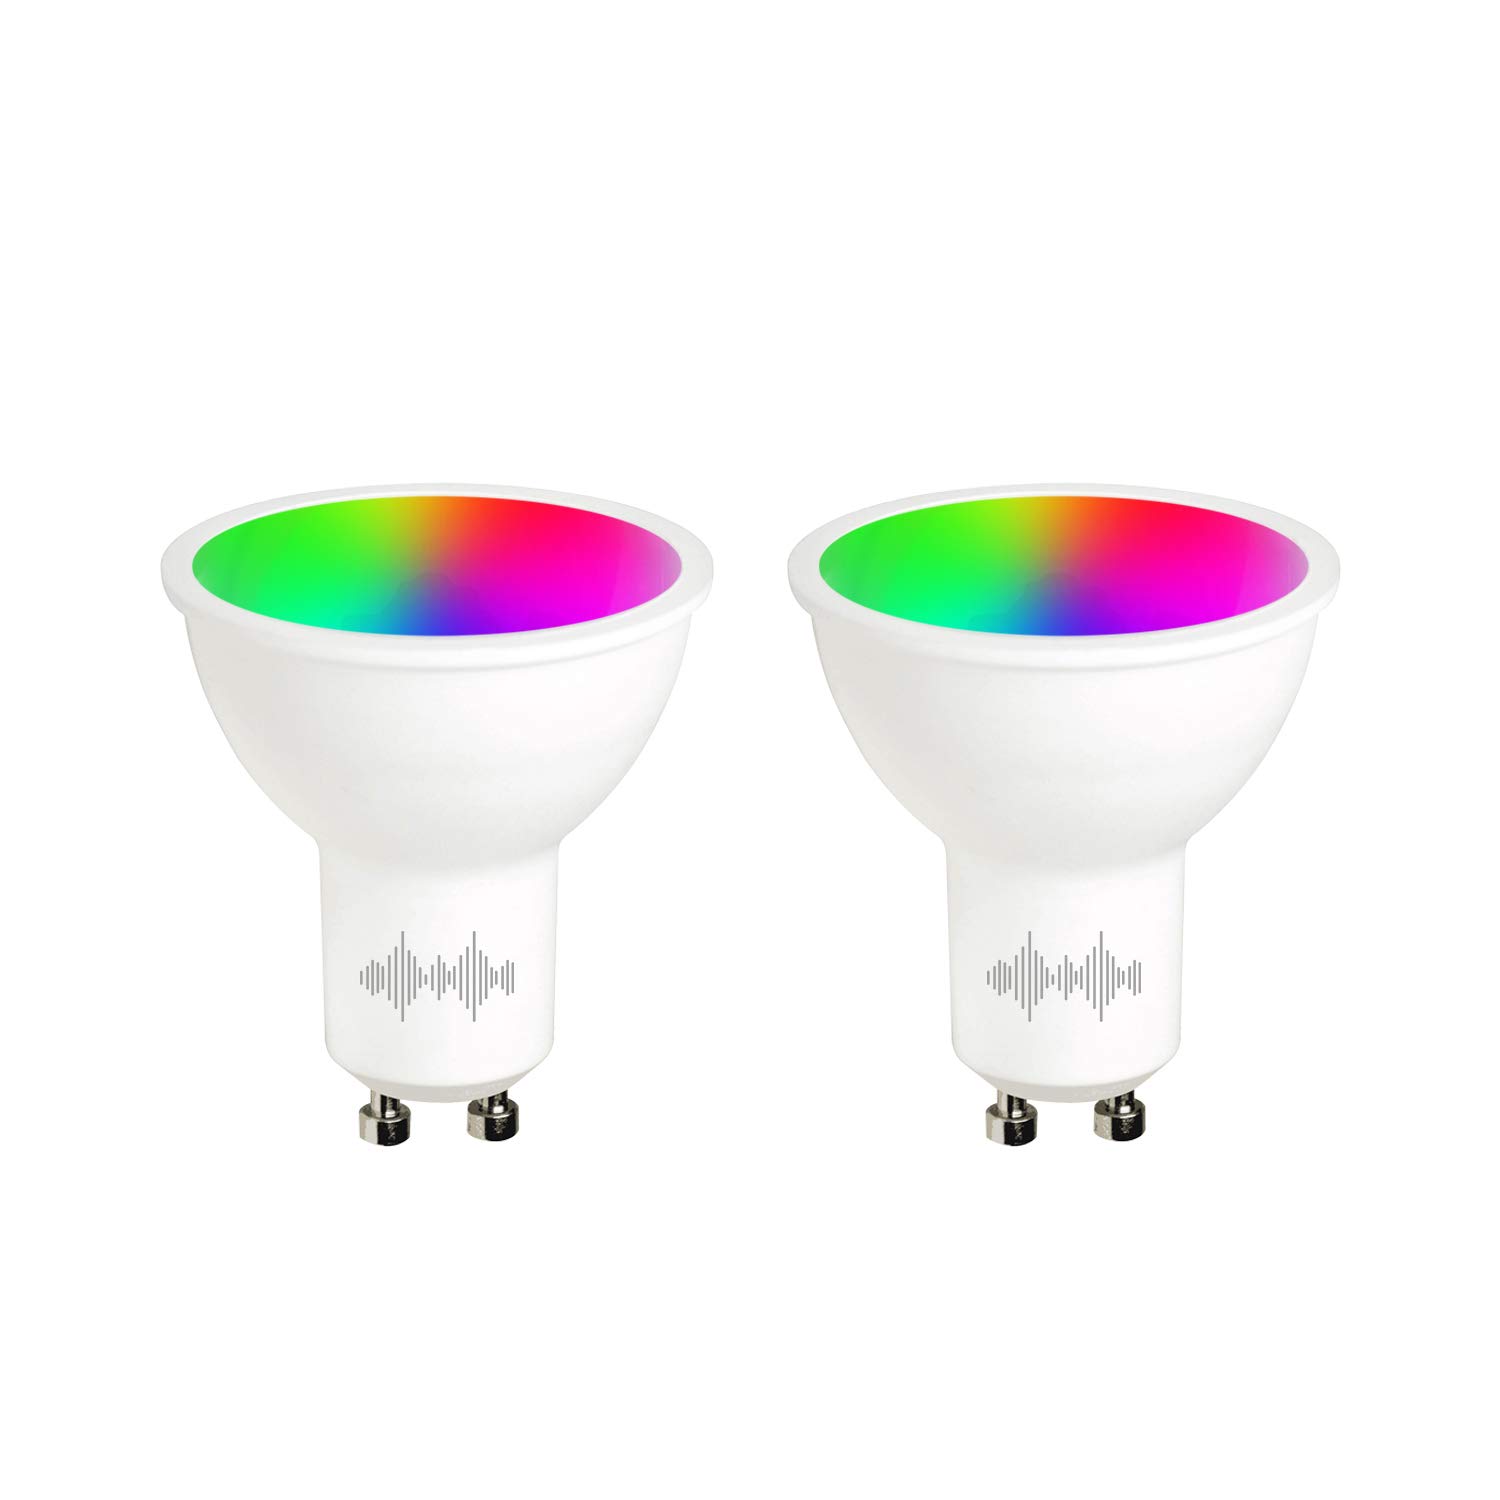 helloify GU10 LED Smart, WiFi Light Bulb Compatible with Alexa Google Home, RGBCW Color Changing, Cool Warm White Dimmable, No Hub Required, 40W Equivalent, RGB+2700K-6500K, 2 Pack